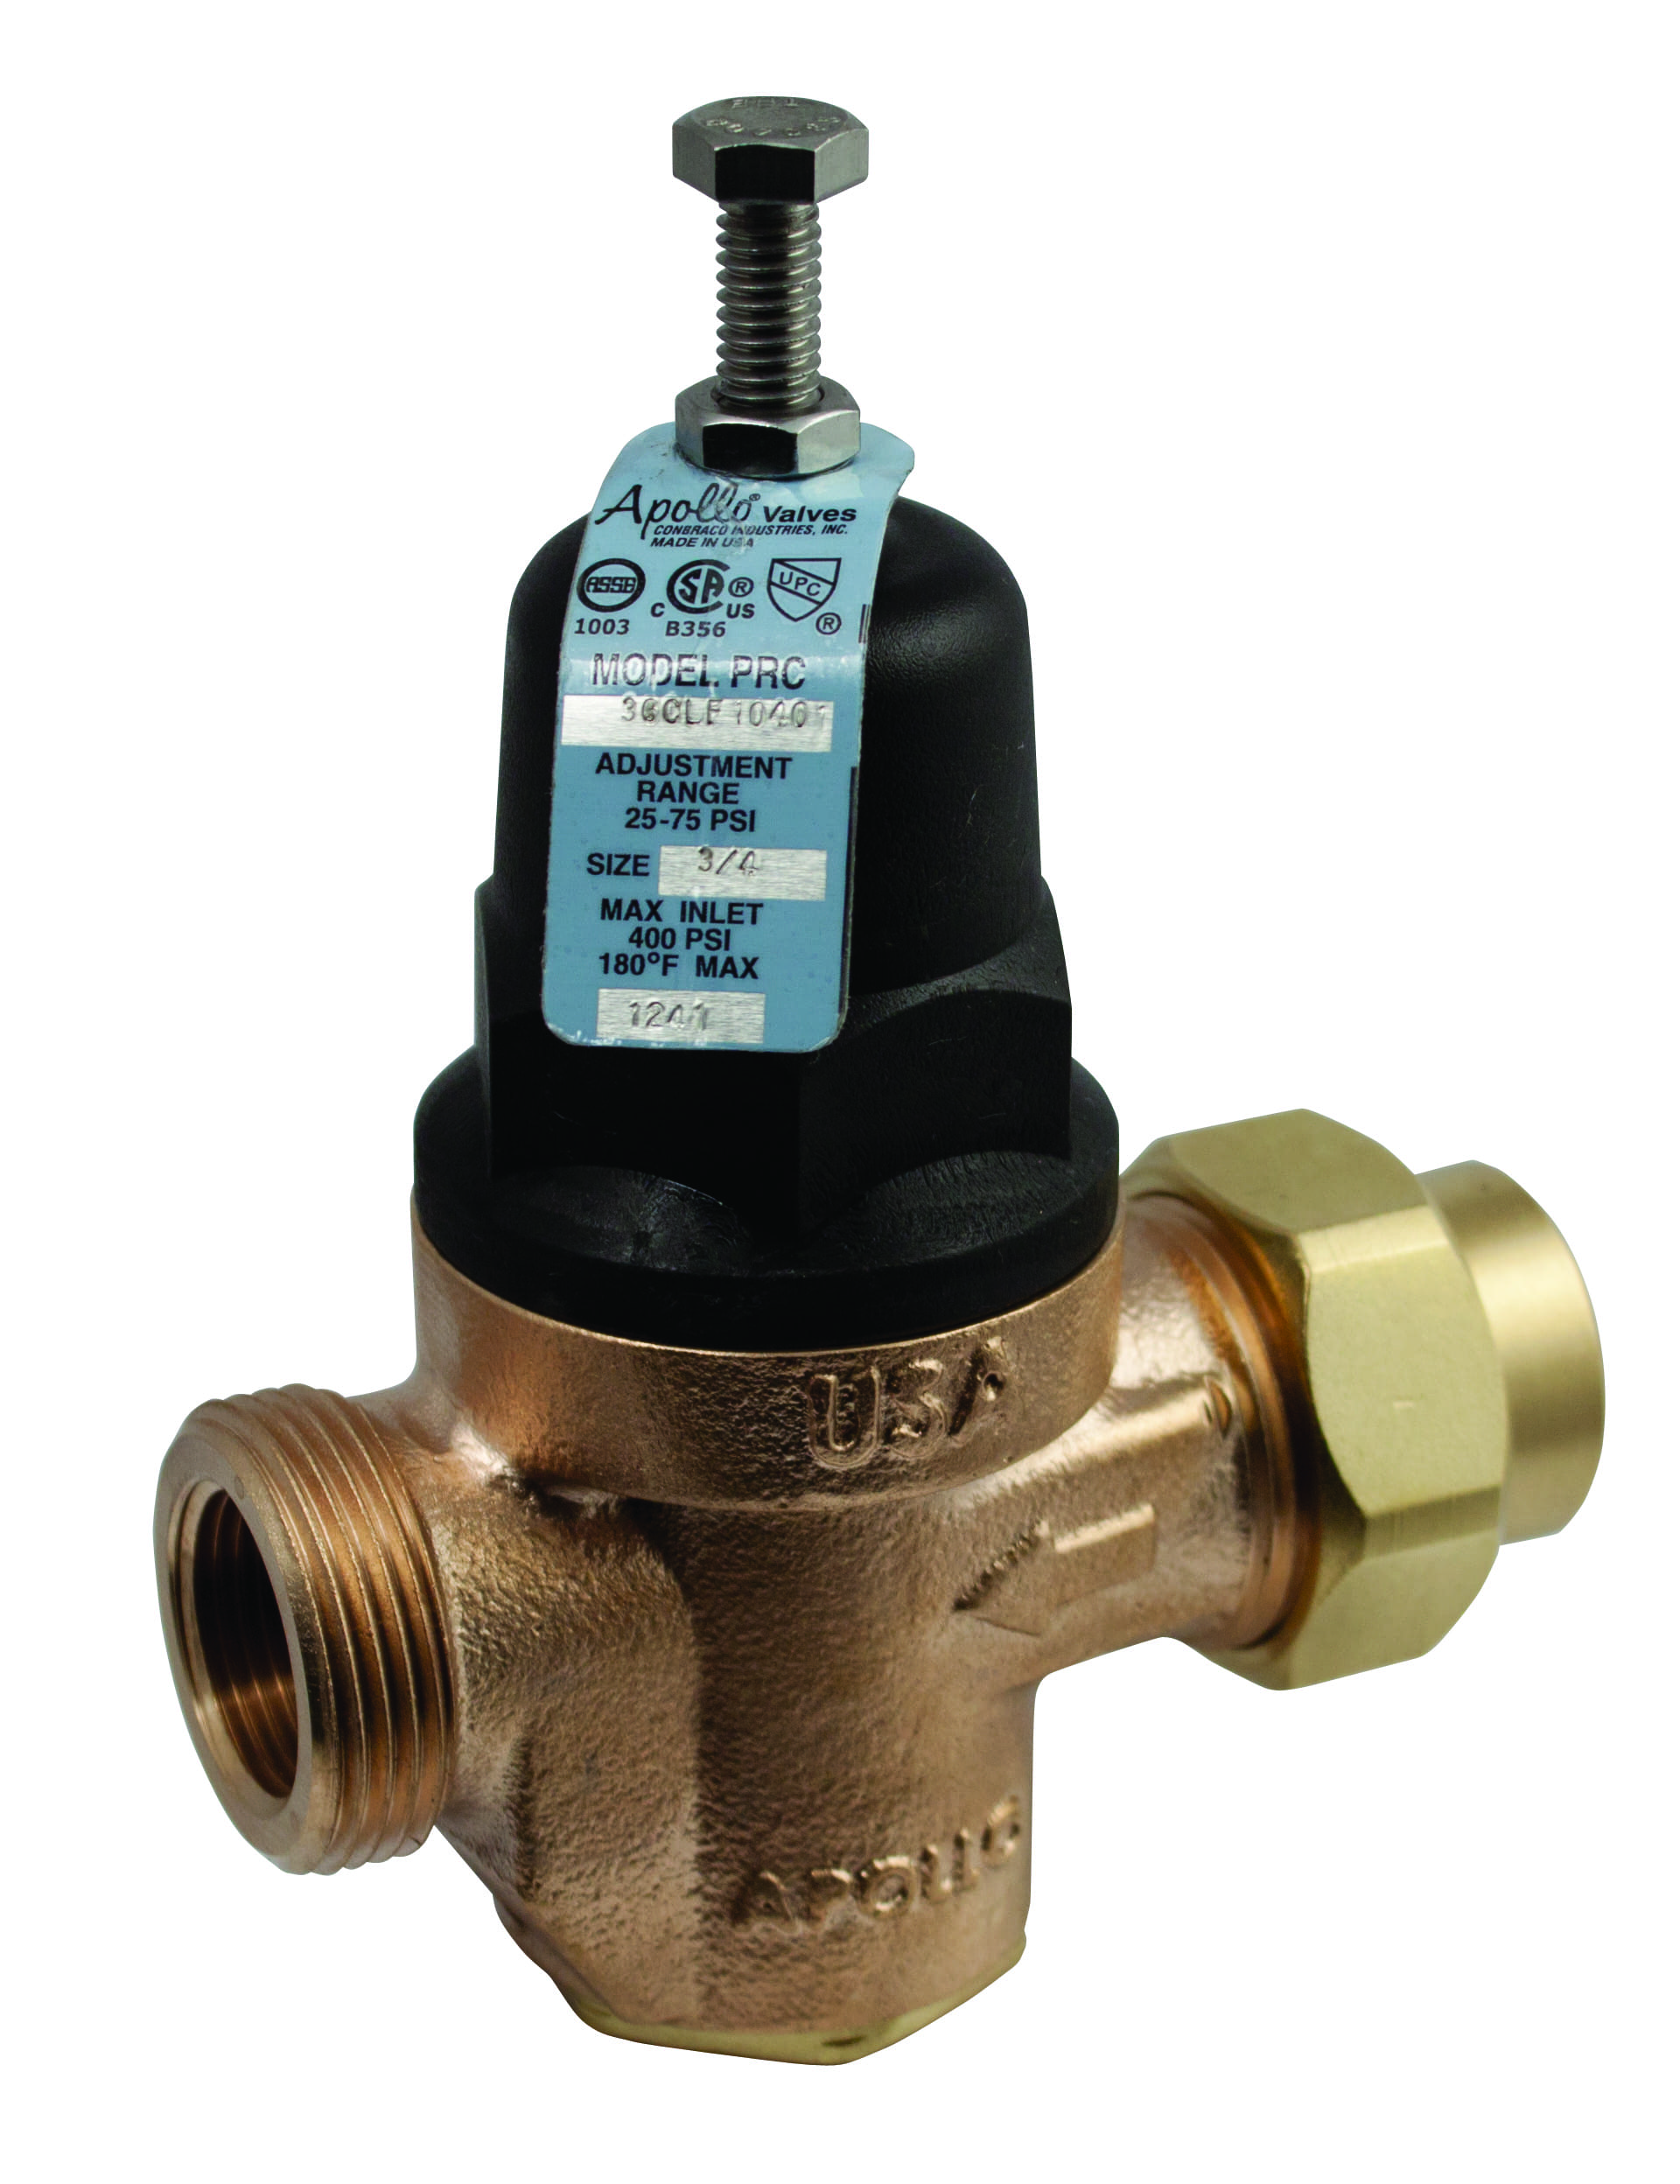 Preview image for Apollo Compact Lead Free Water Pressure Reducing Valves (2 x FNPT)